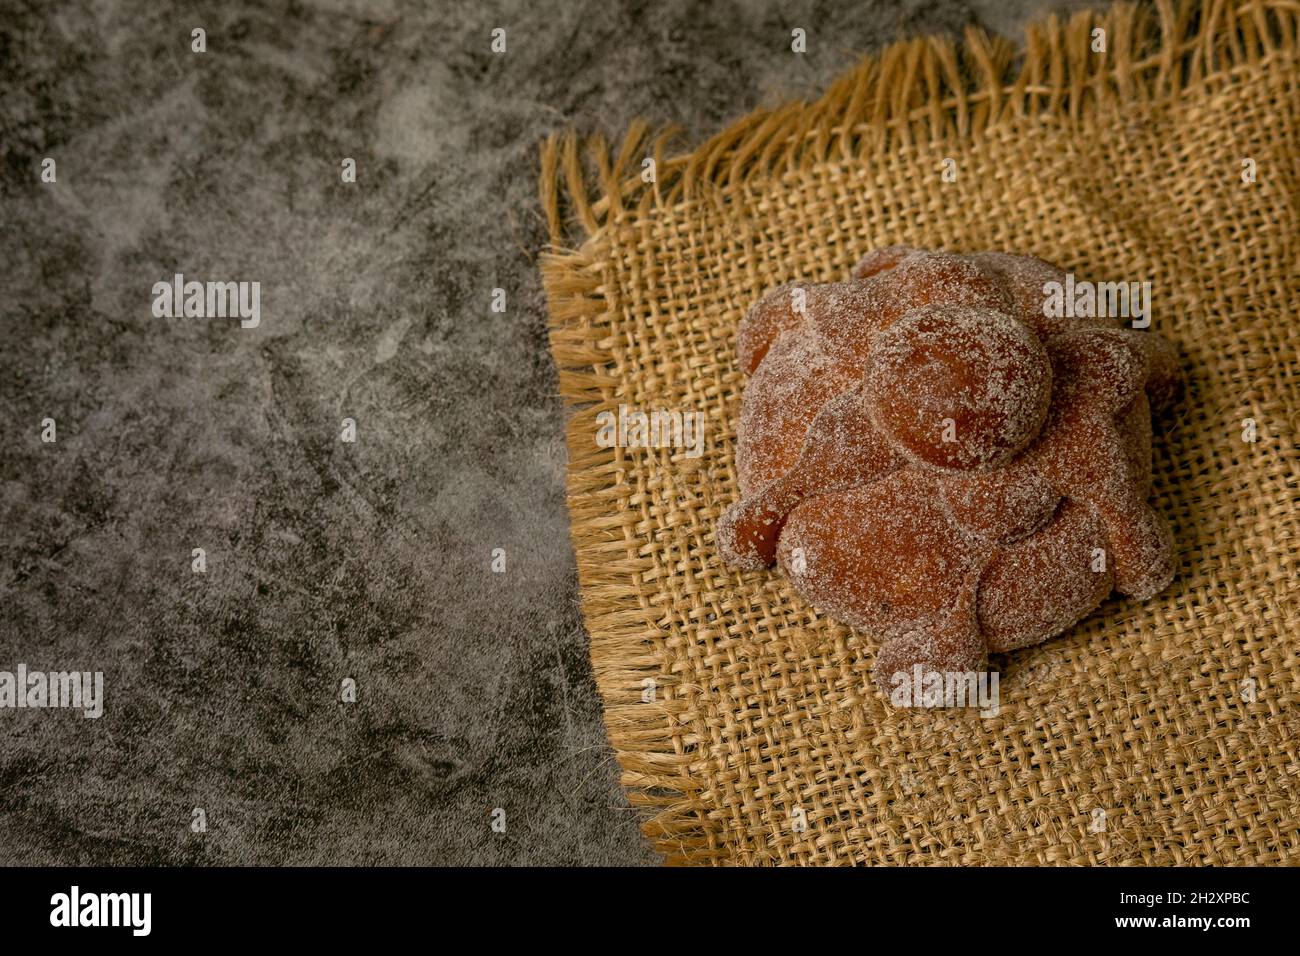 Sweet bread called Bread of the Dead (Pan de Muerto) on the brown sacking Stock Photo